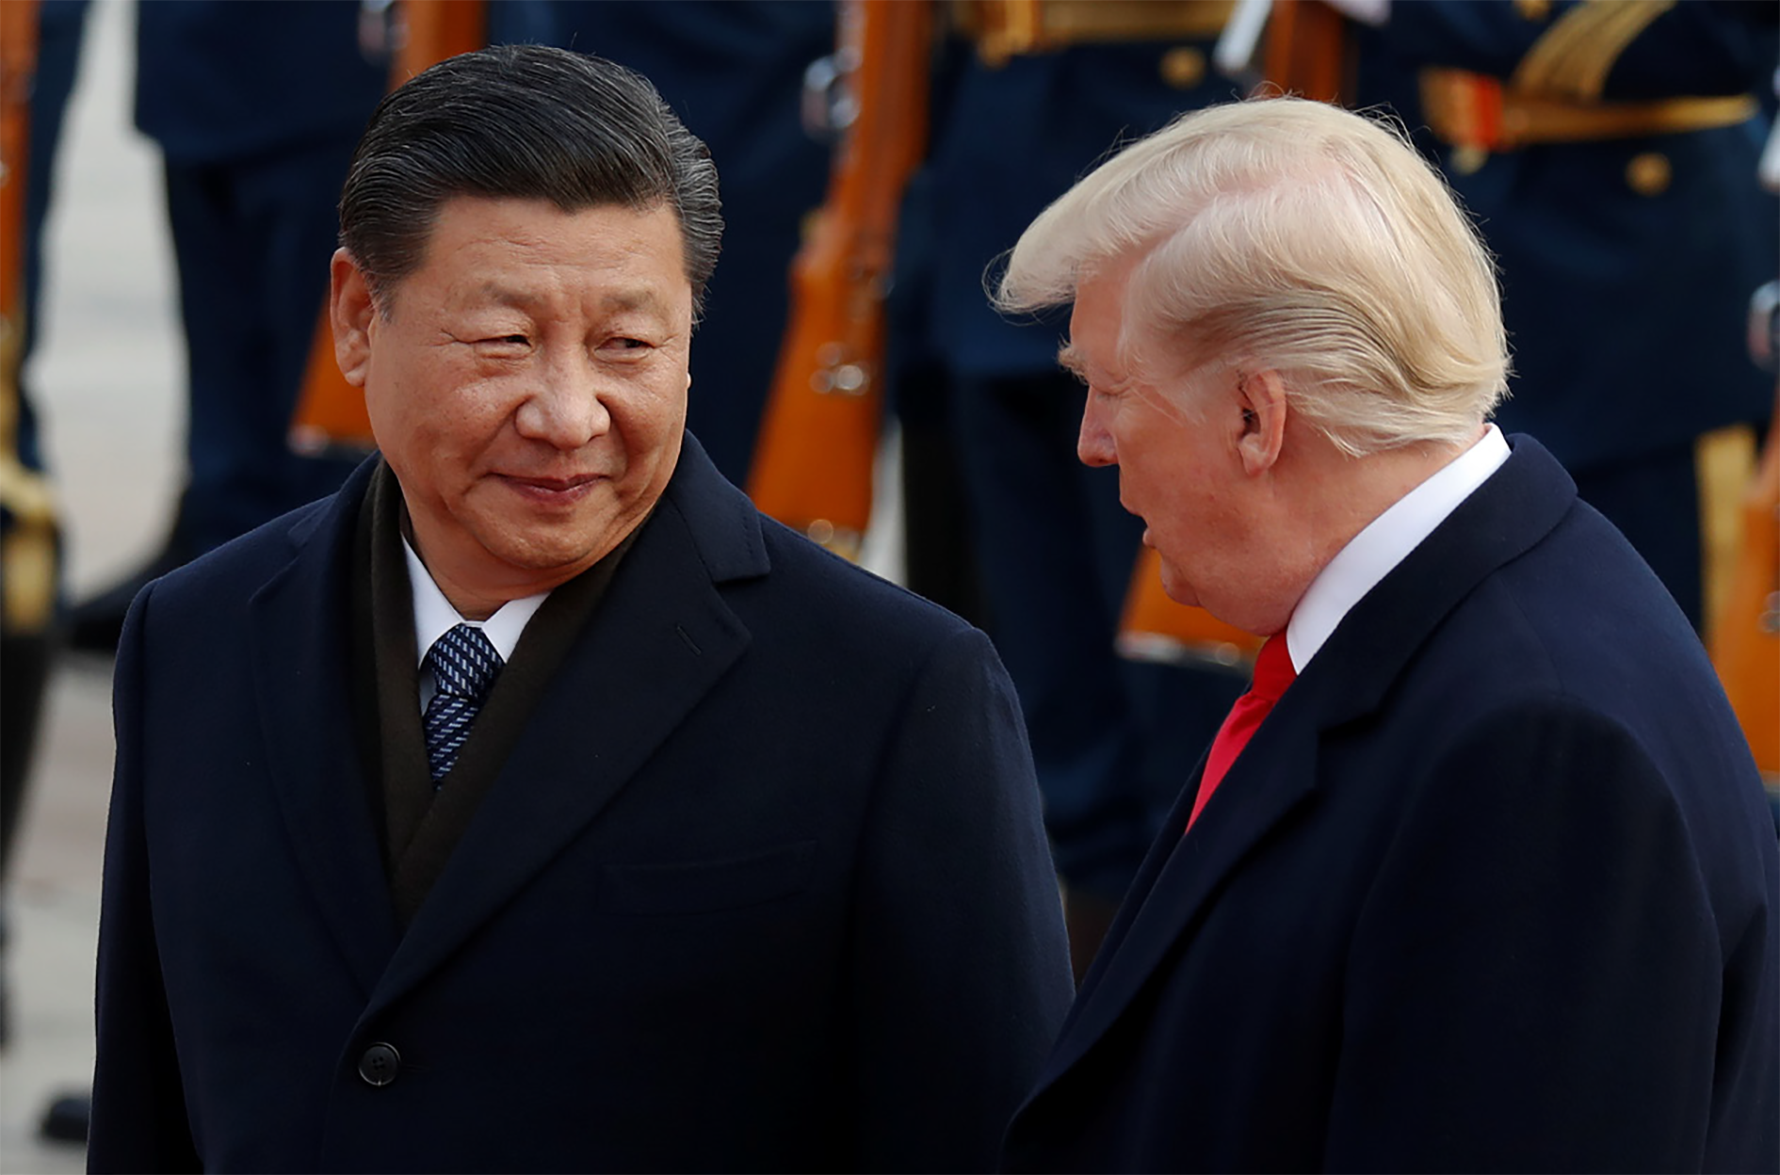 Image President Trump and Xi